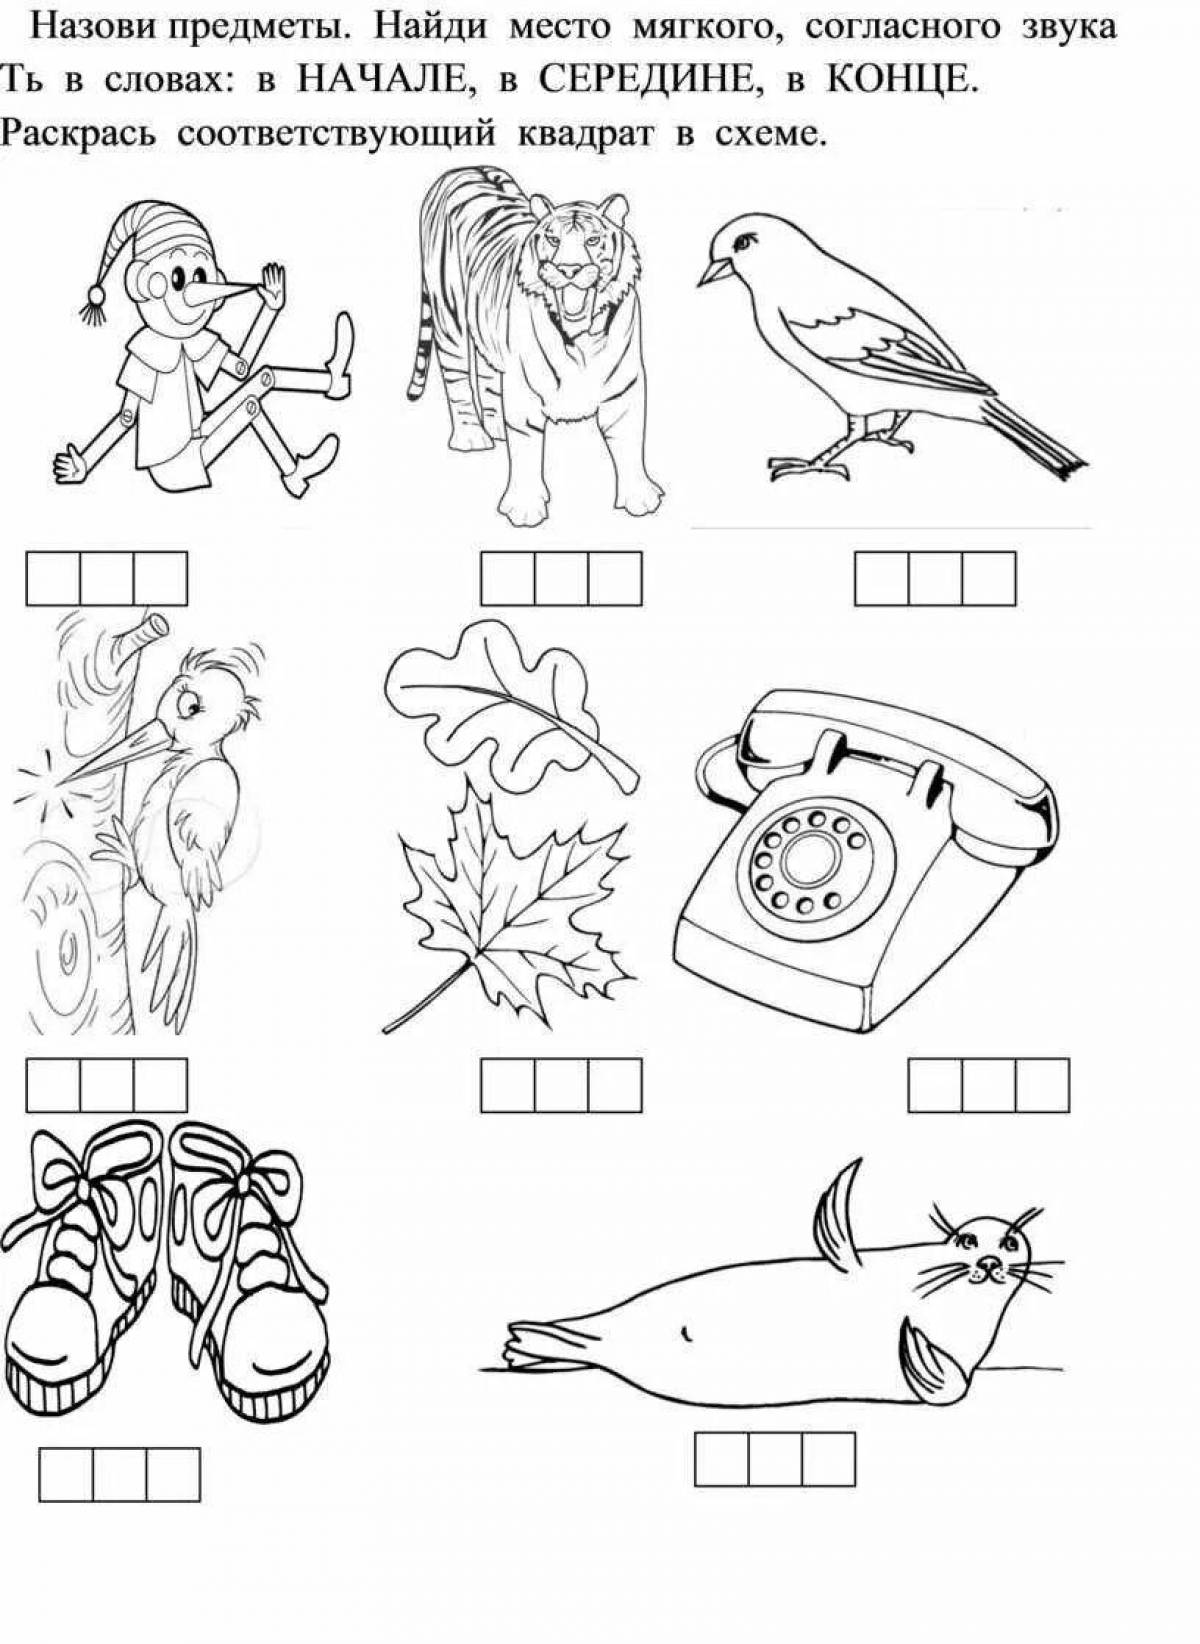 Creative coloring page differentiation t